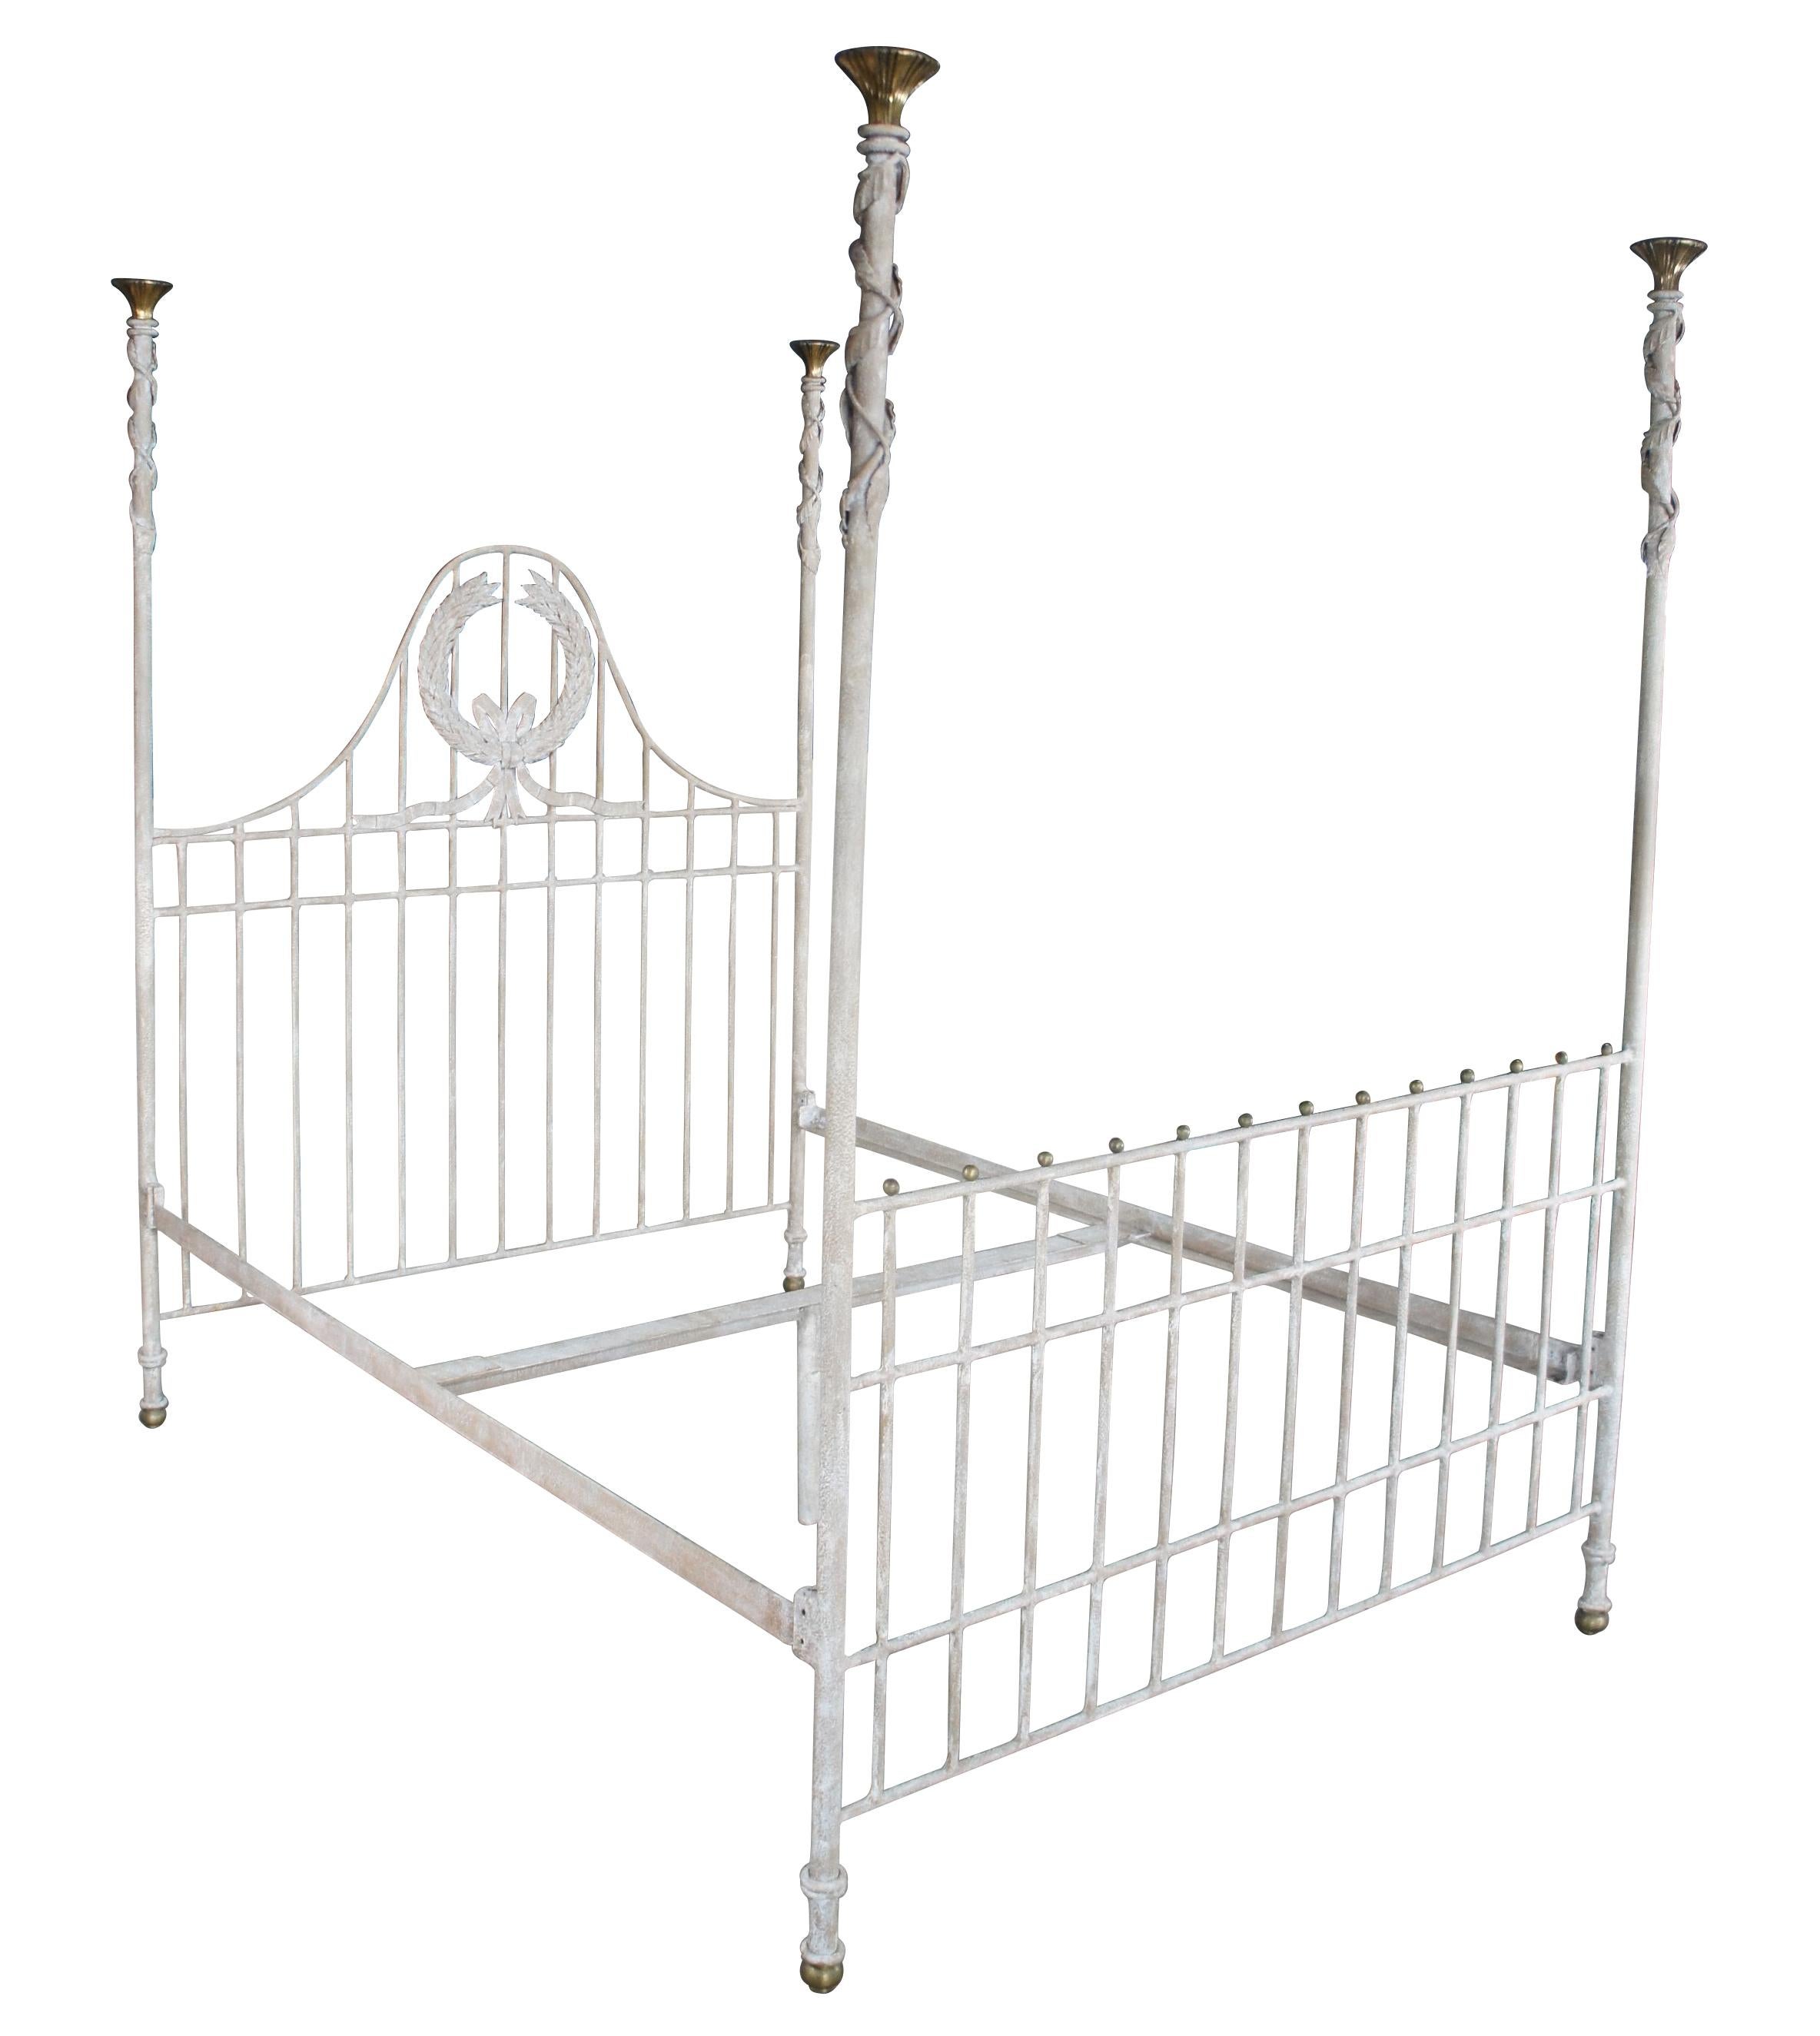 Late 20th century 4 poster bed by Lineage Home Furnishings for Maitland Smith. Made from wrought iron with a gridded form. The camelback headboard is centered by a large laurel wreath. Each long post is topped by brass torchiere over a leaf and vine